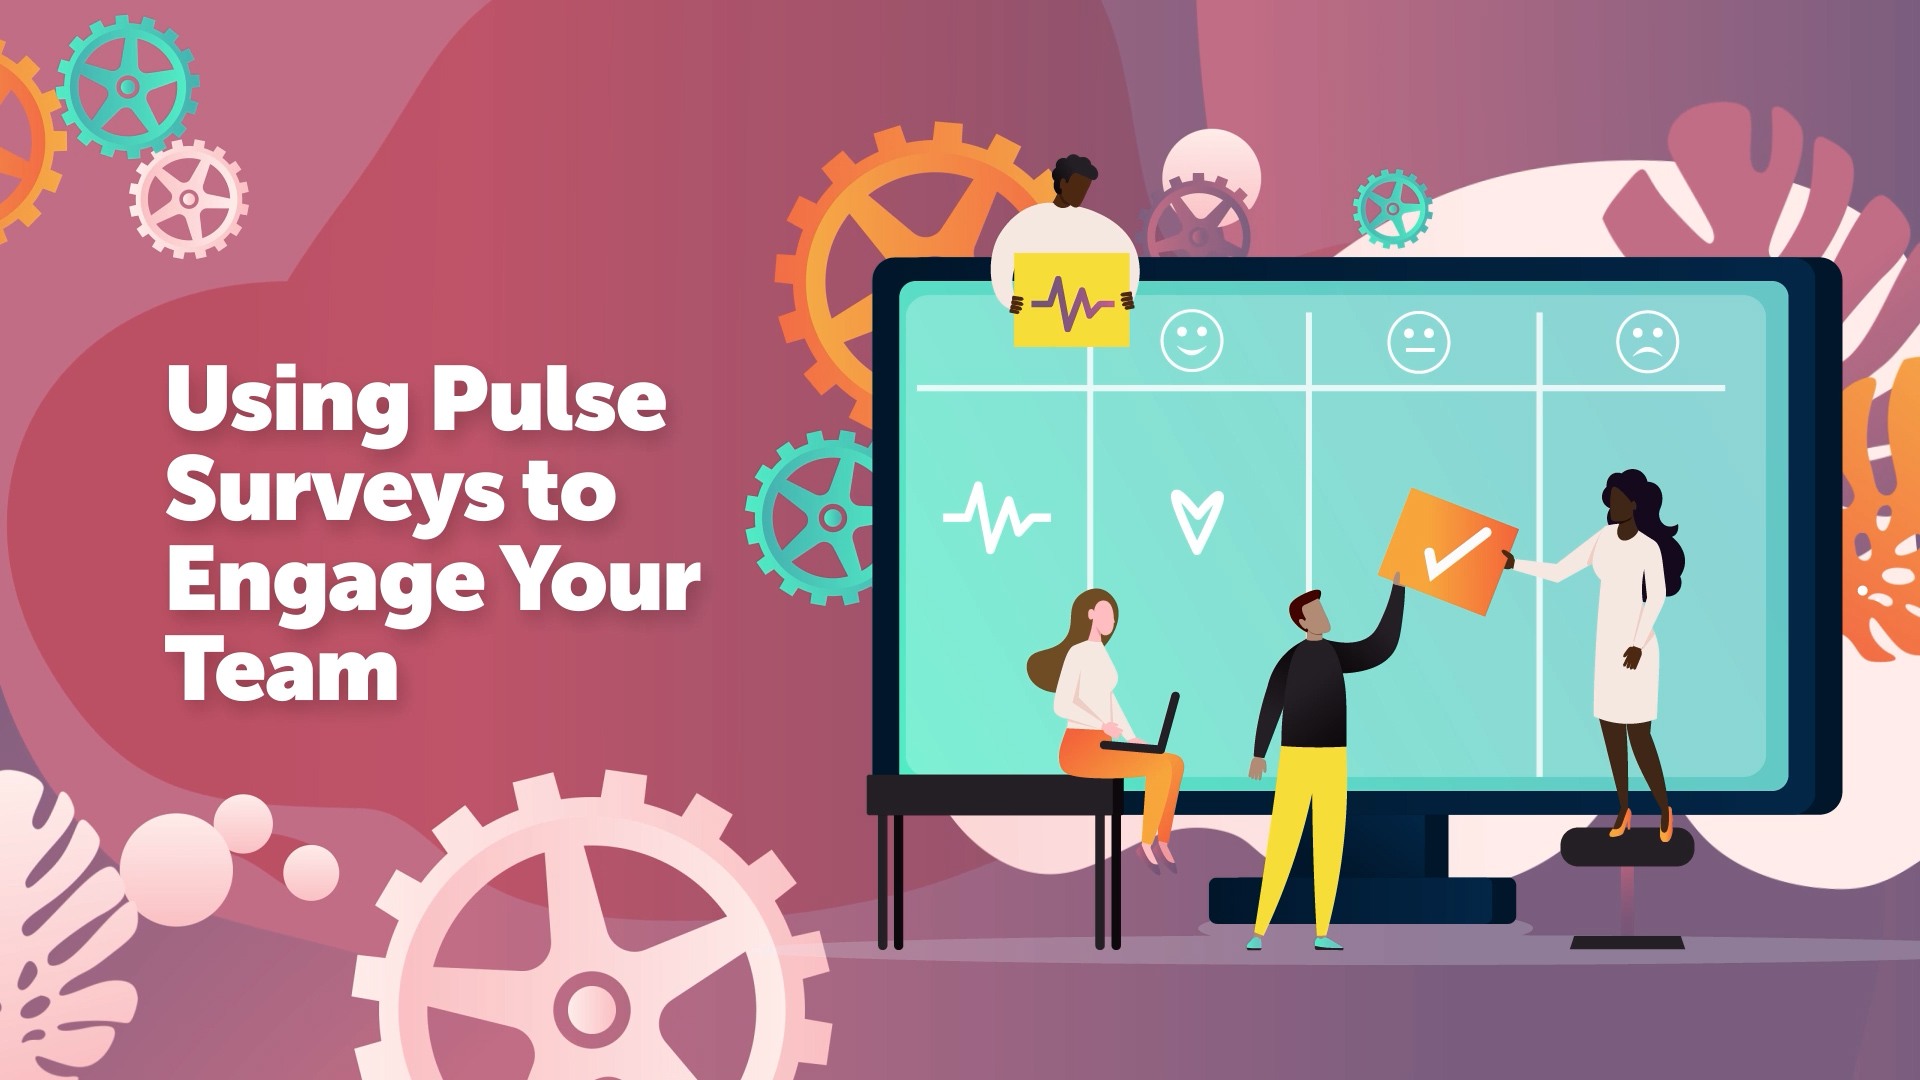 Using Pulse Surveys to Engage Your Team: Introductory Video